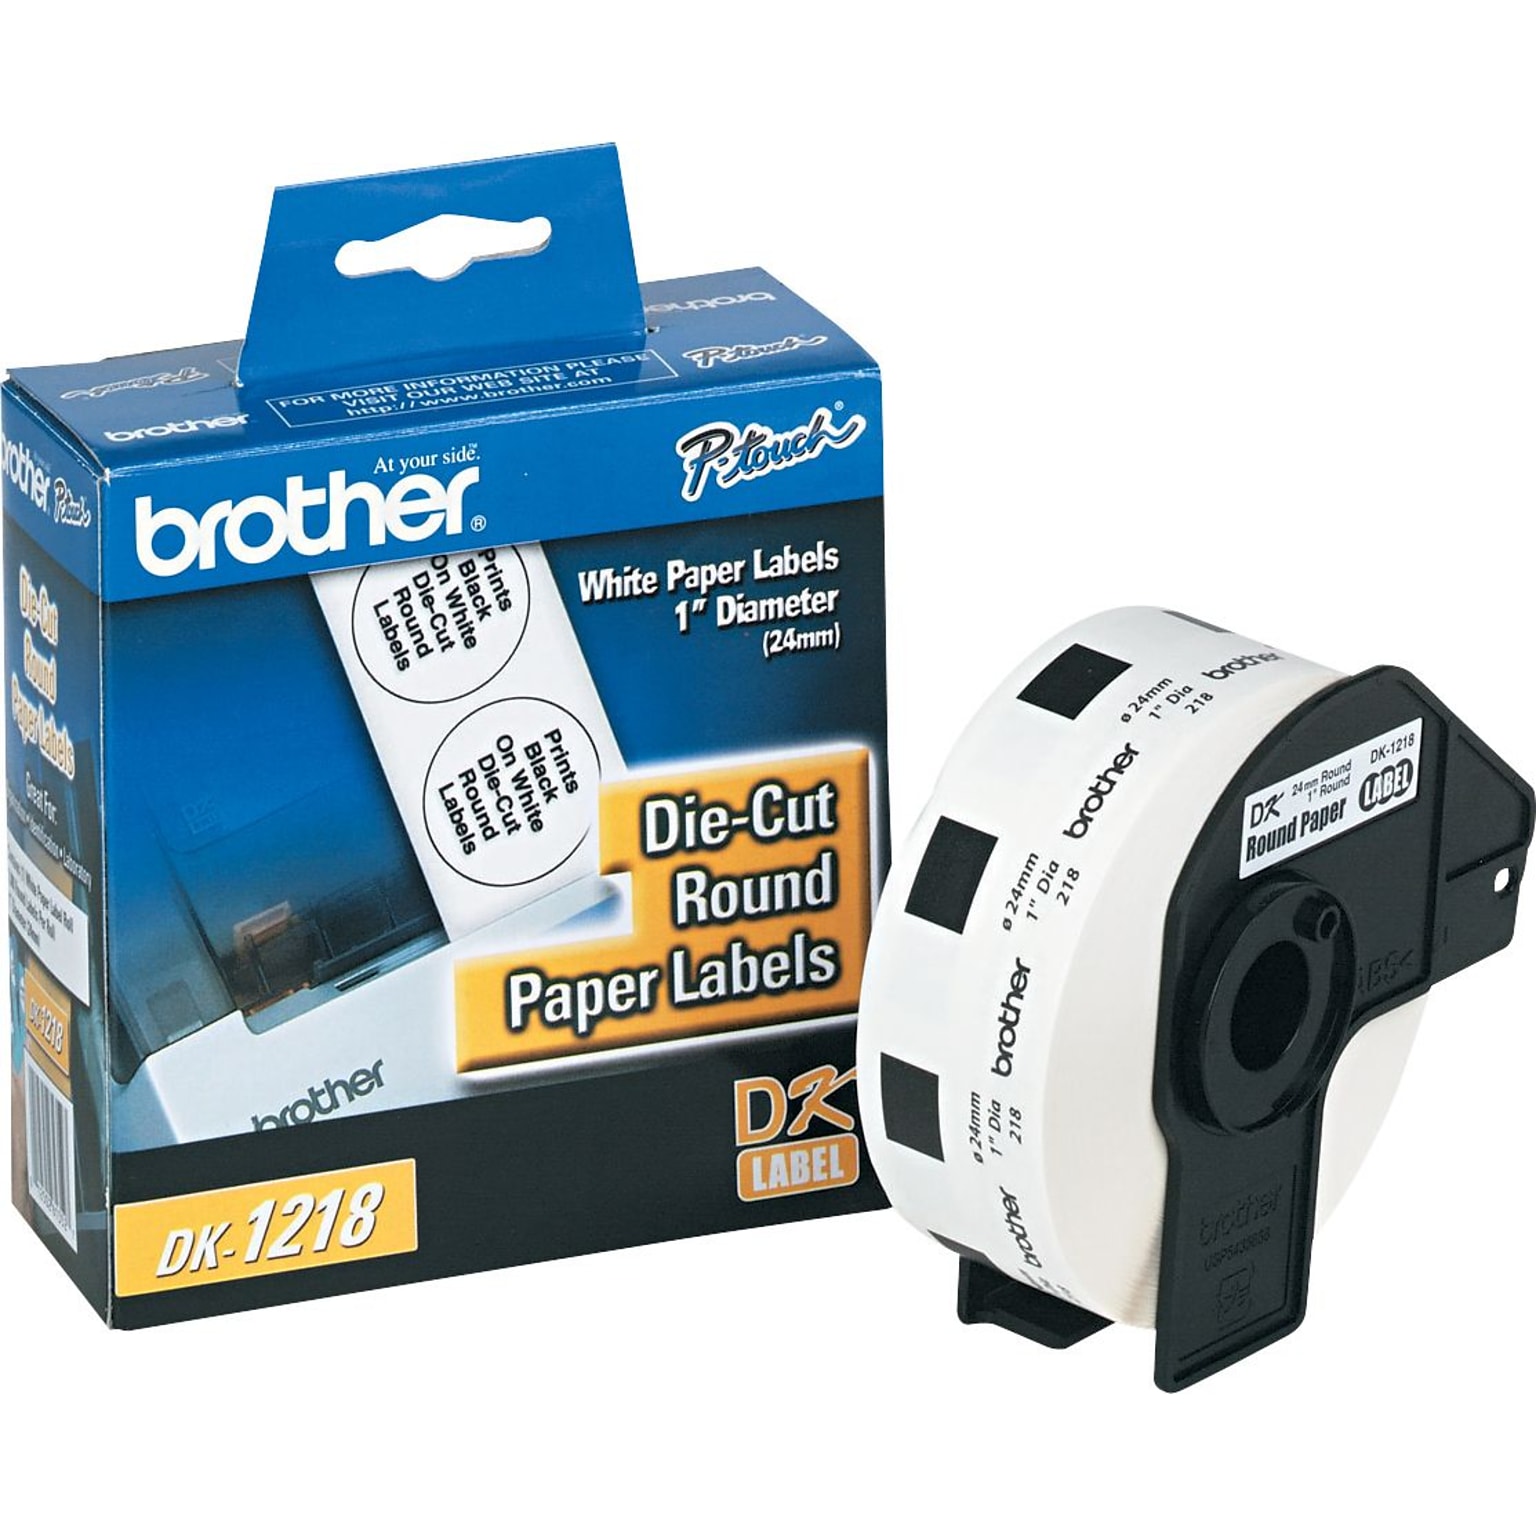 Brother P-Touch Label Printer Round Die-Cut Paper Labels, DK1218, White, 1 x 1, 1,000/Roll